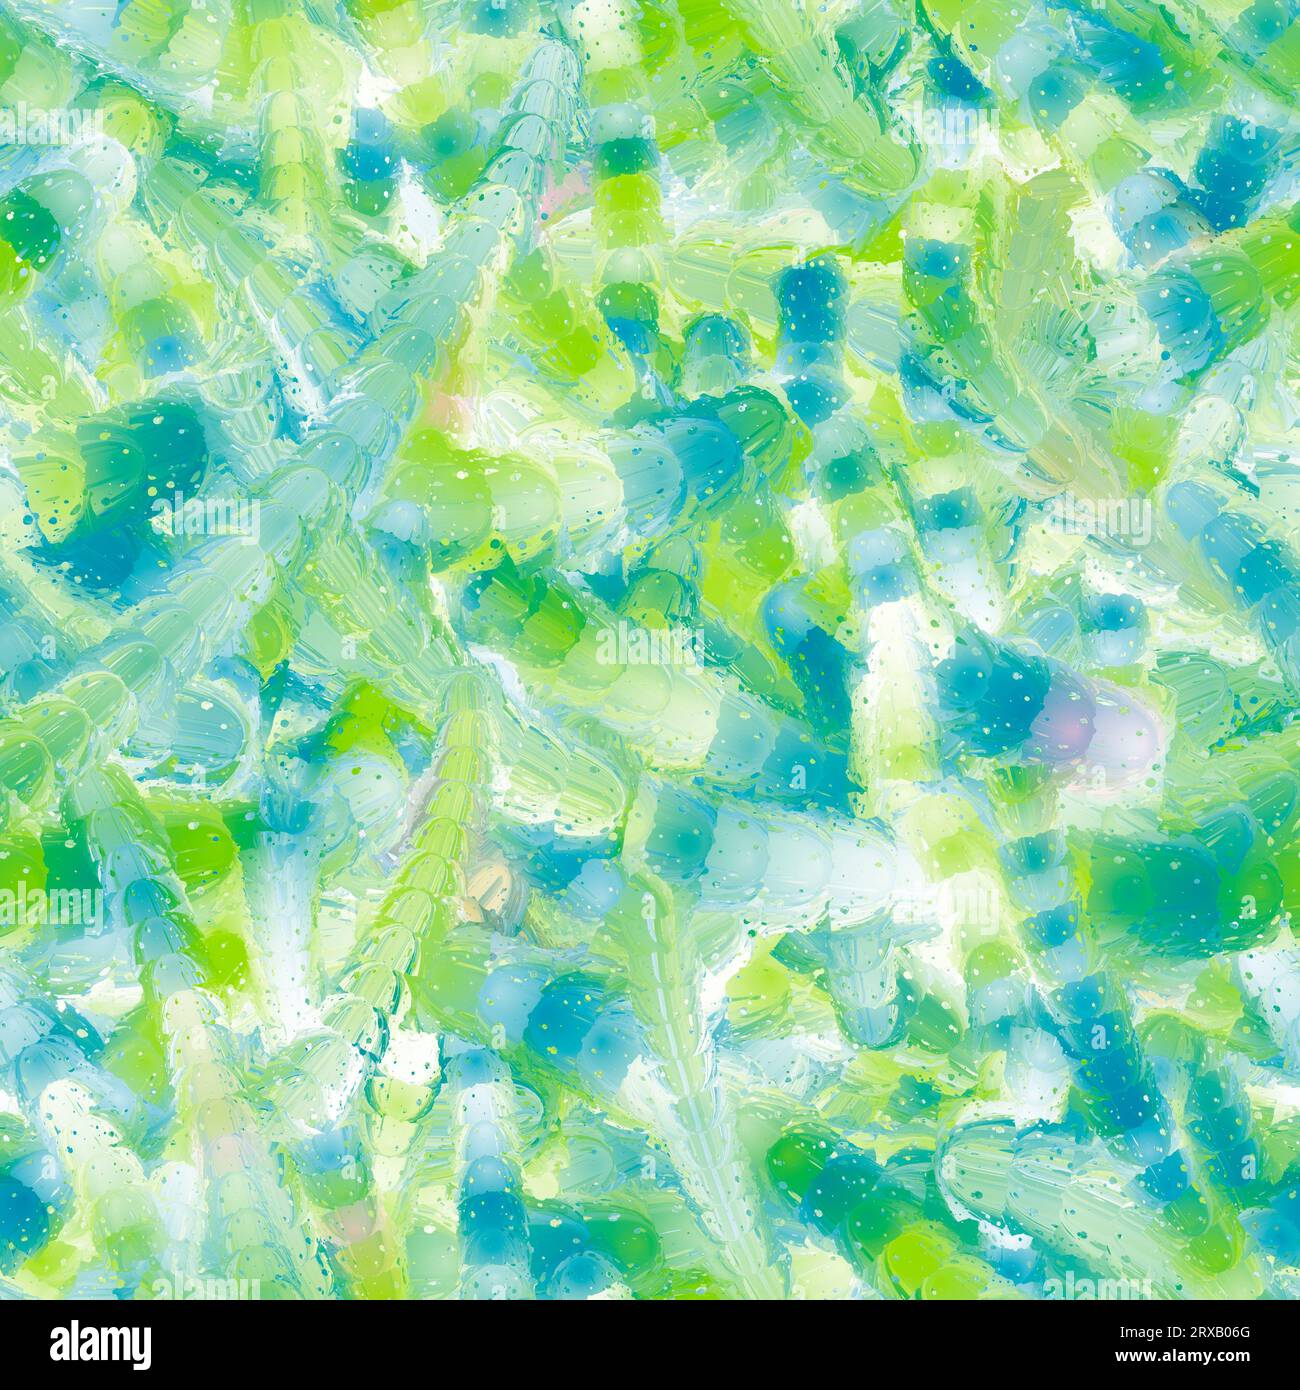 Bright long green and blue liquid brush strokes with reflection. Multicellular organism imitation. Candy imitation. Seamless pattern Stock Photo